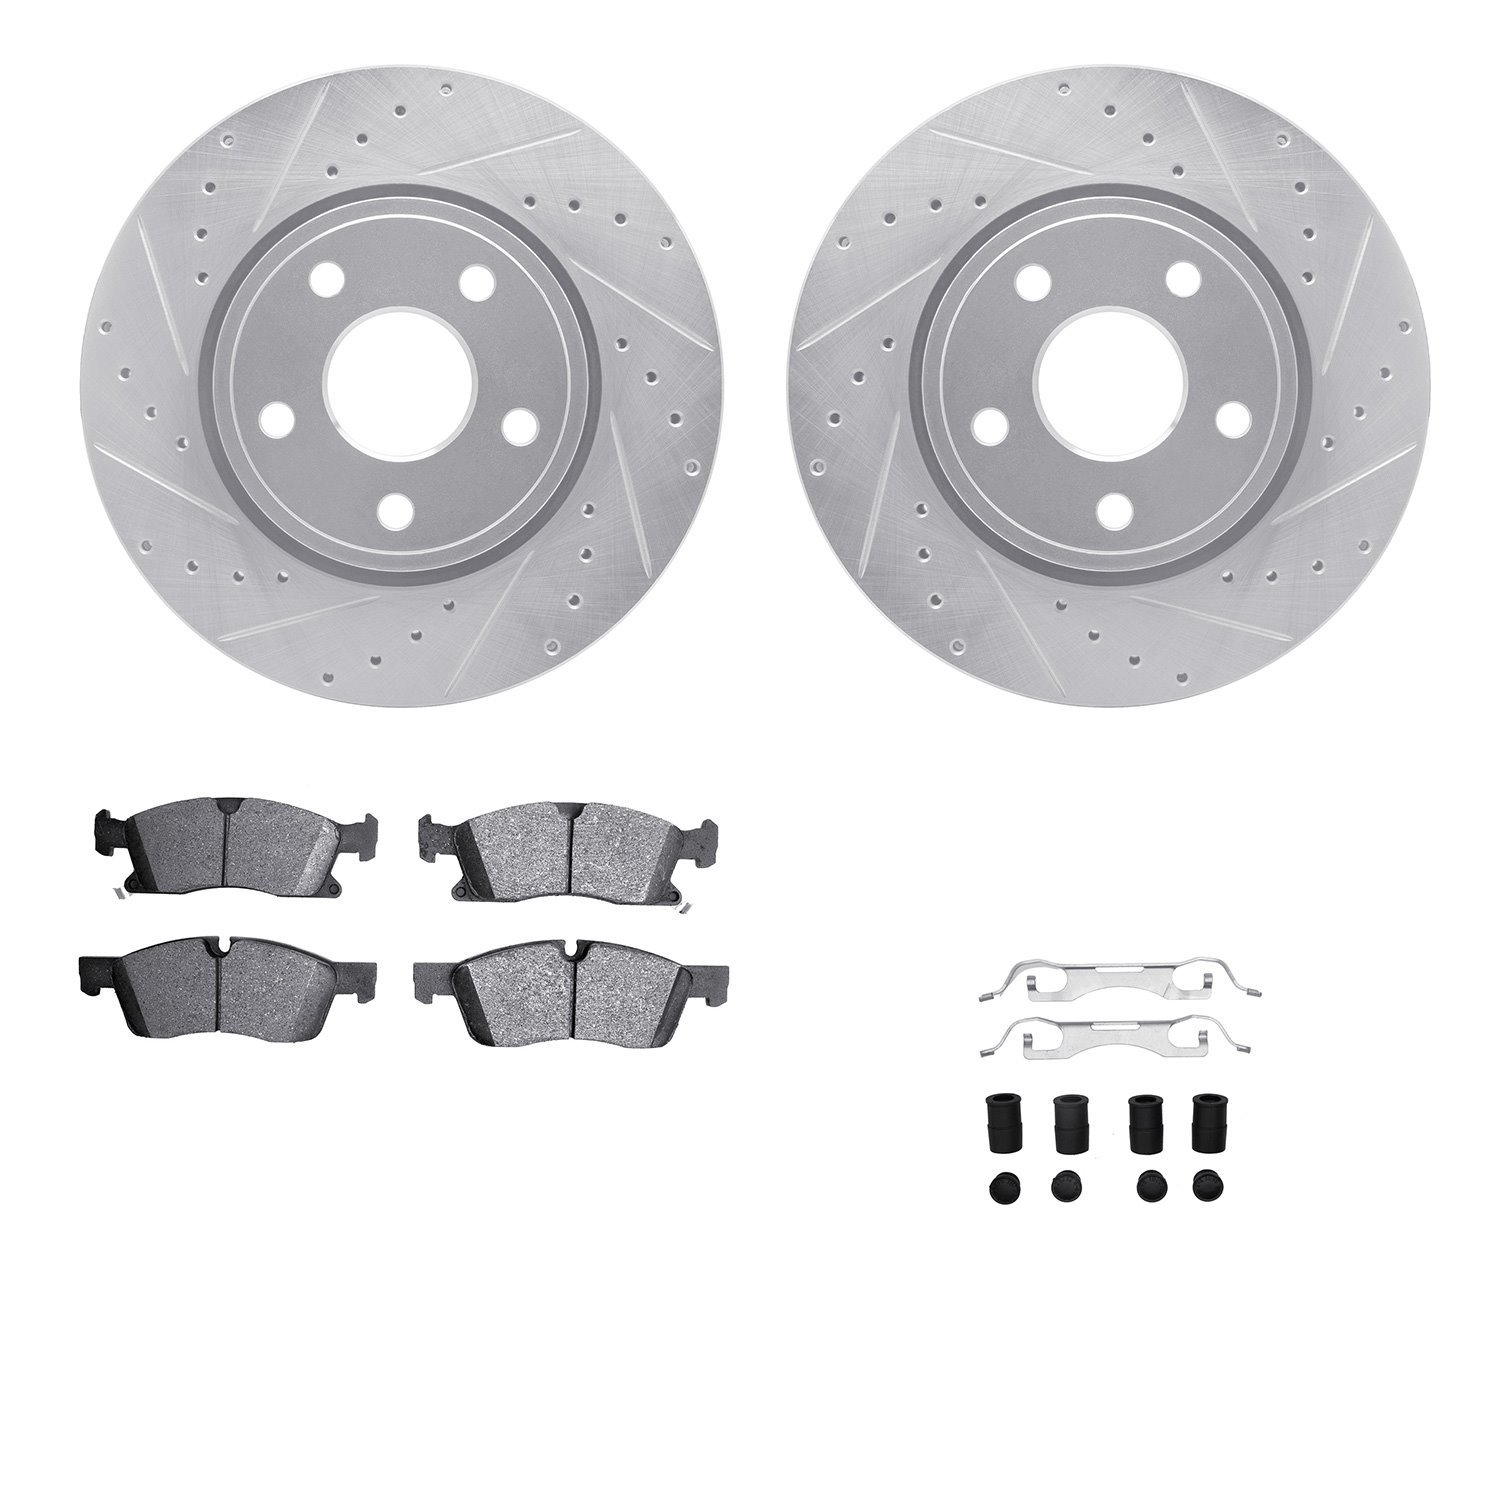 7612-42002 Drilled/Slotted Brake Rotors w/5000 Euro Ceramic Brake Pads Kit & Hardware [Silver], Fits Select Mopar, Position: Fro